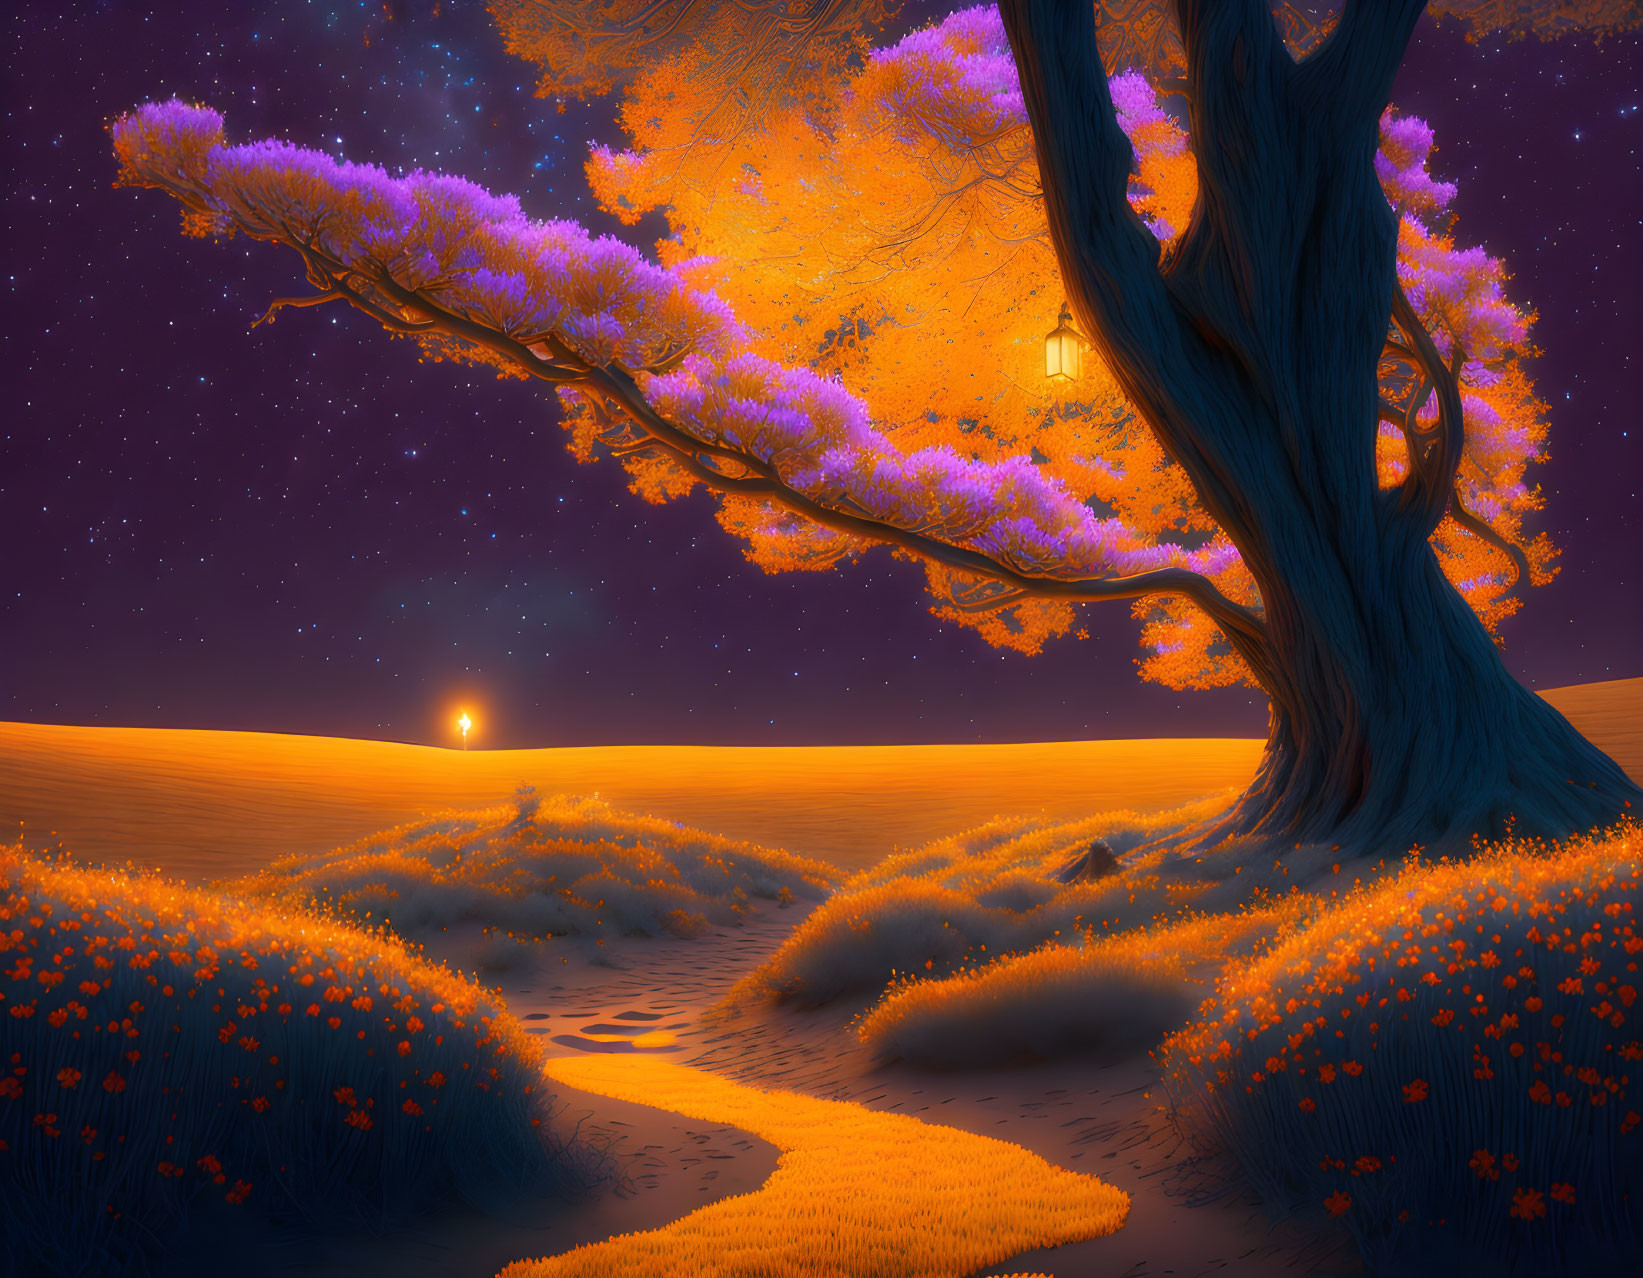 Colorful orange and purple tree with glowing lantern in starry sky scene.